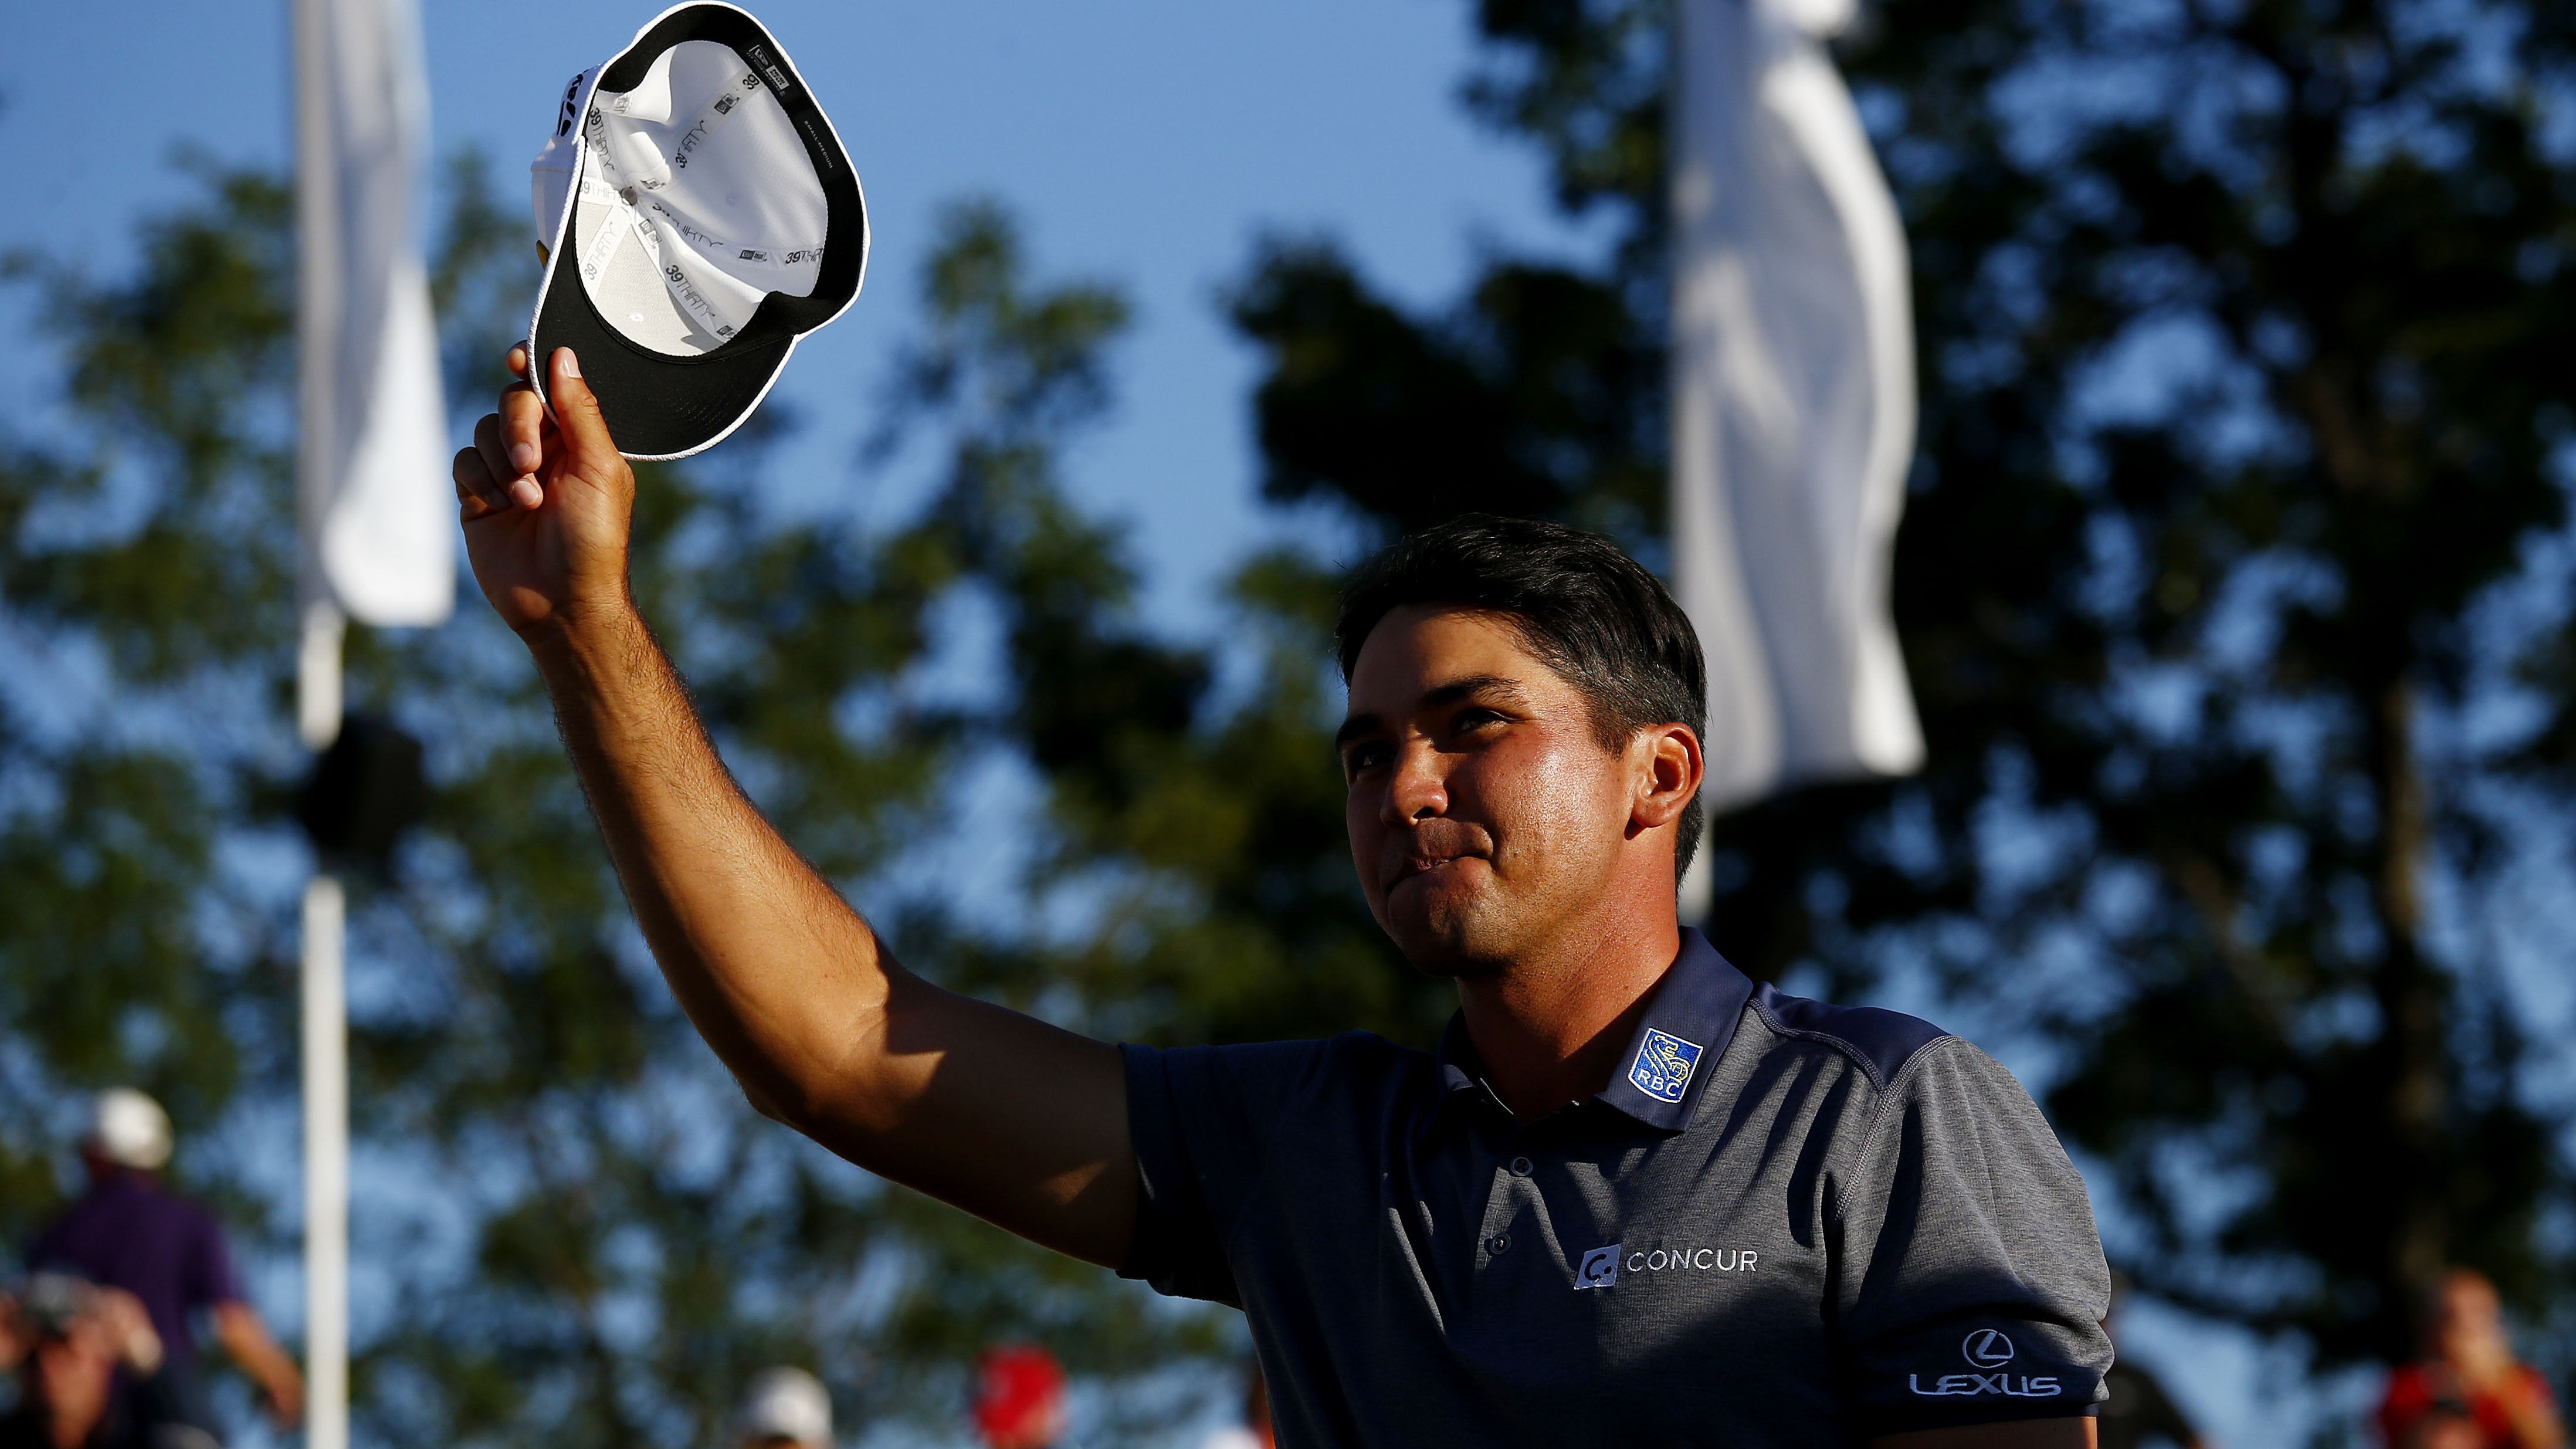 How to Watch TOUR Championship Round 1 Live Stream Online